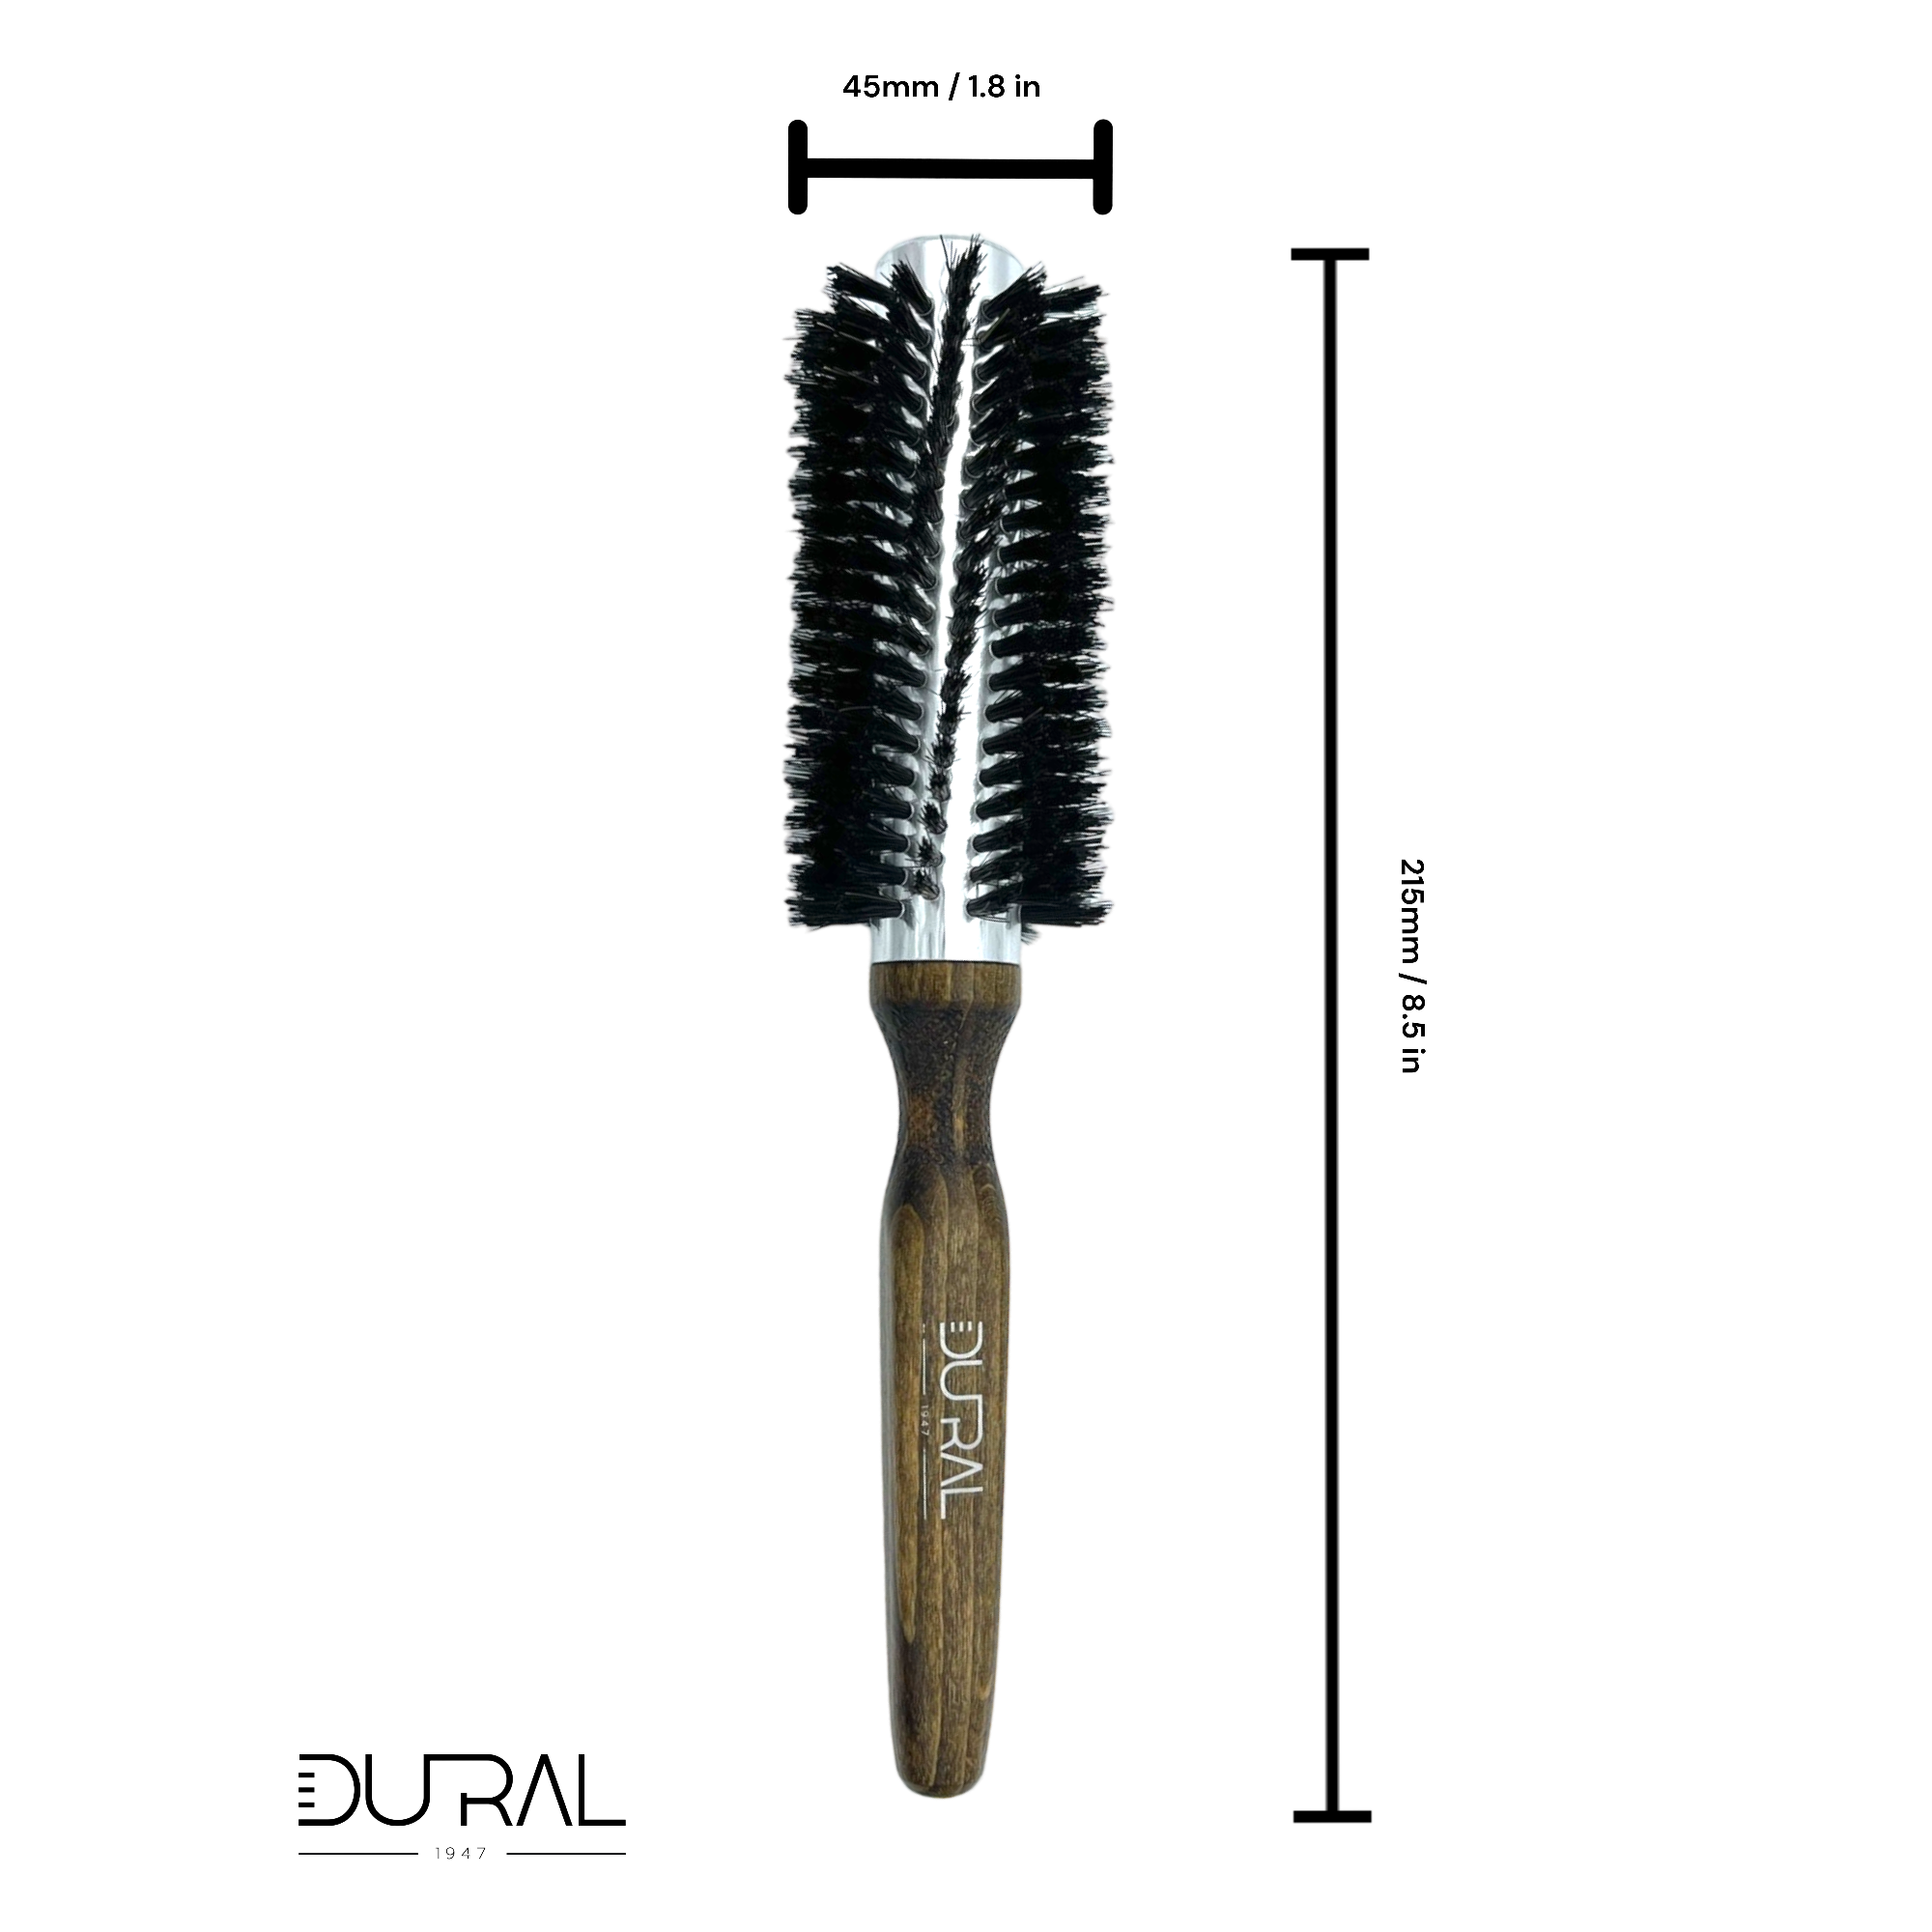 Dural Quick-Styler Beech wood hairbrush with boar bristles - 12 rows